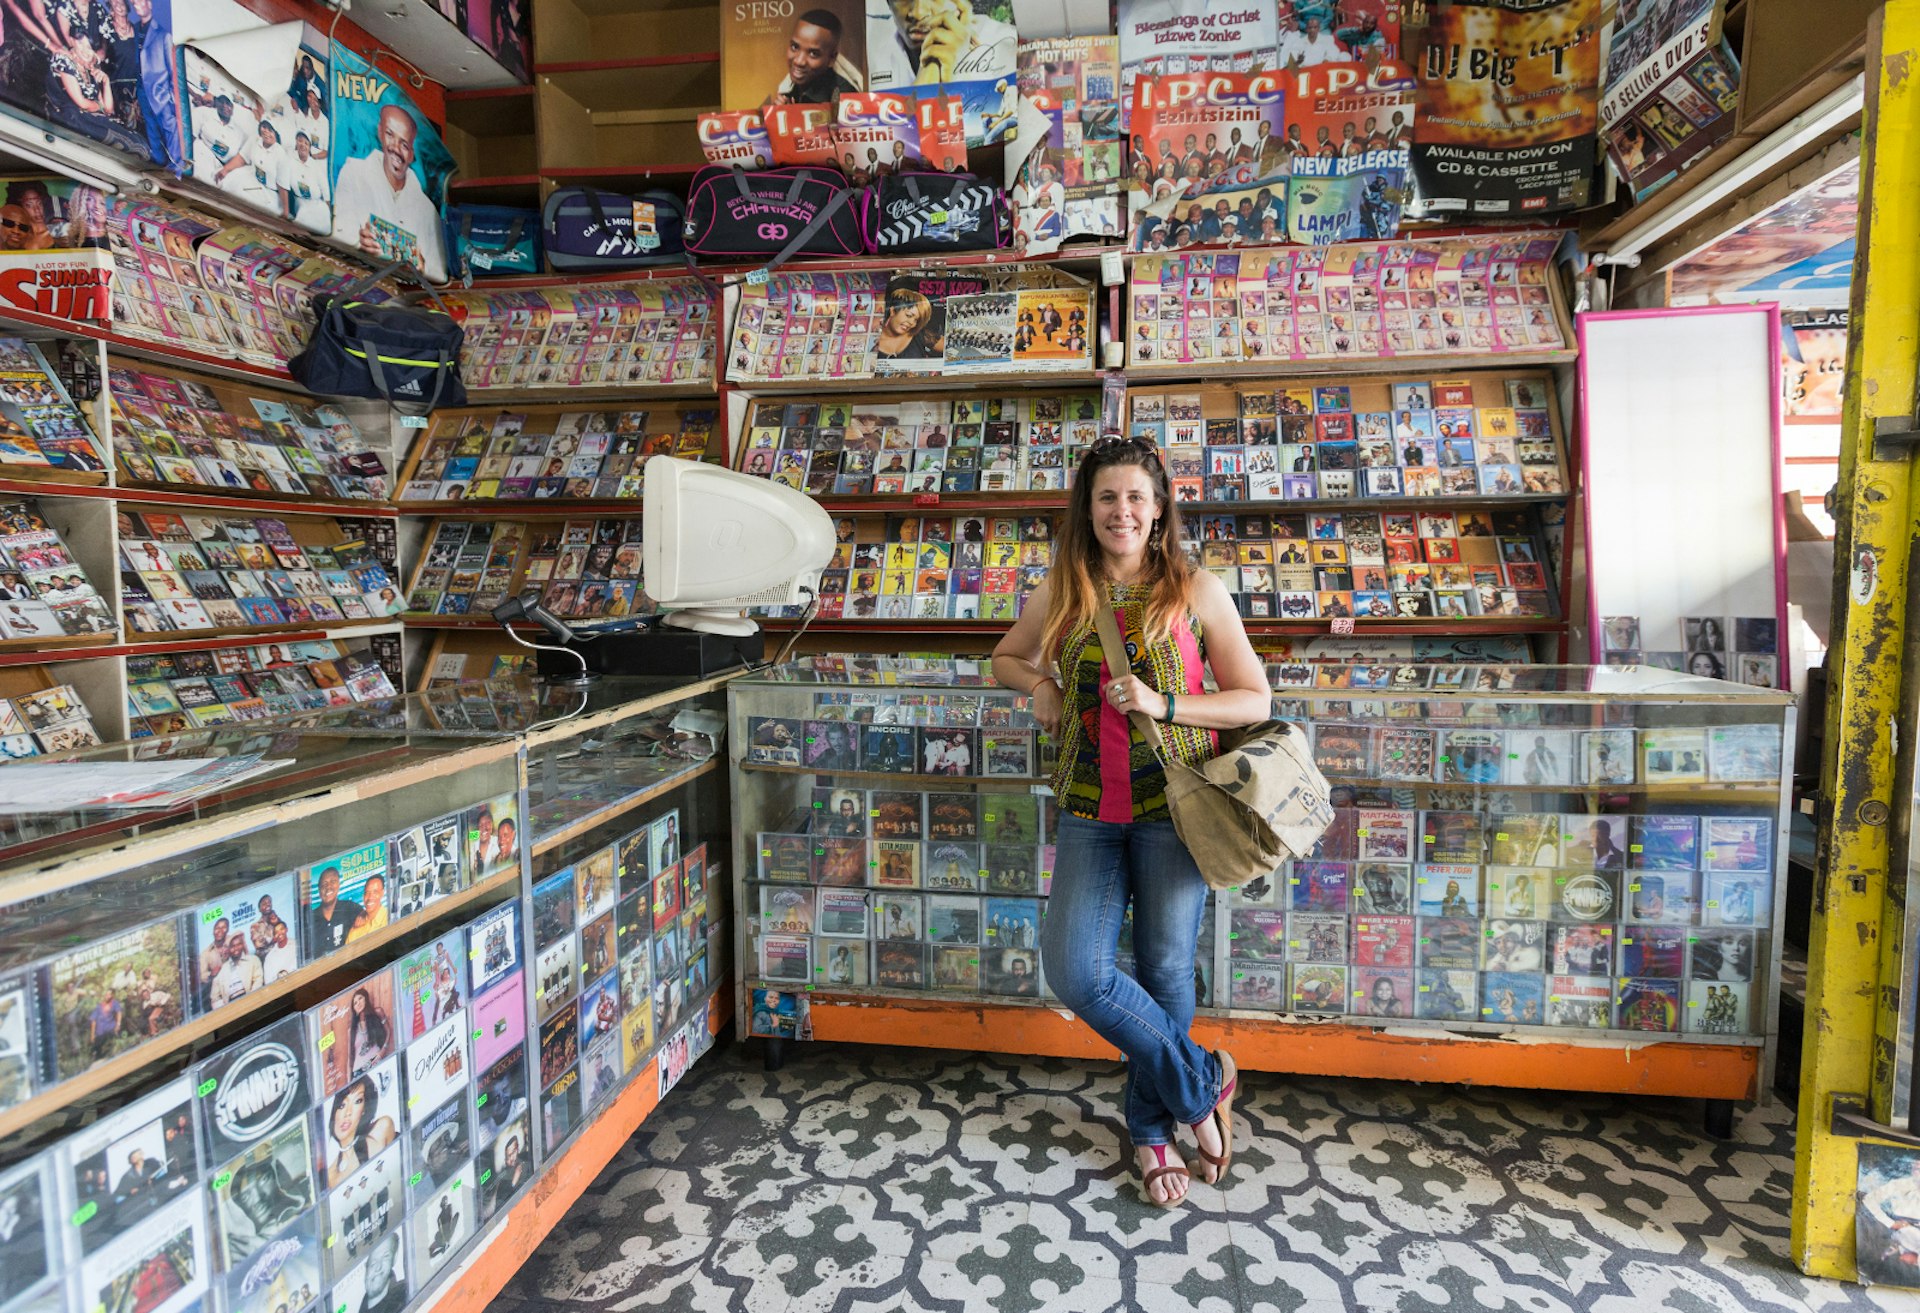 The writer Heather Mason stands smiling and surrounded by cds and cassettes in the Vinyl Joint on Eloff Street, downtown Johannesburg © Heather Mason / Lonely Planet